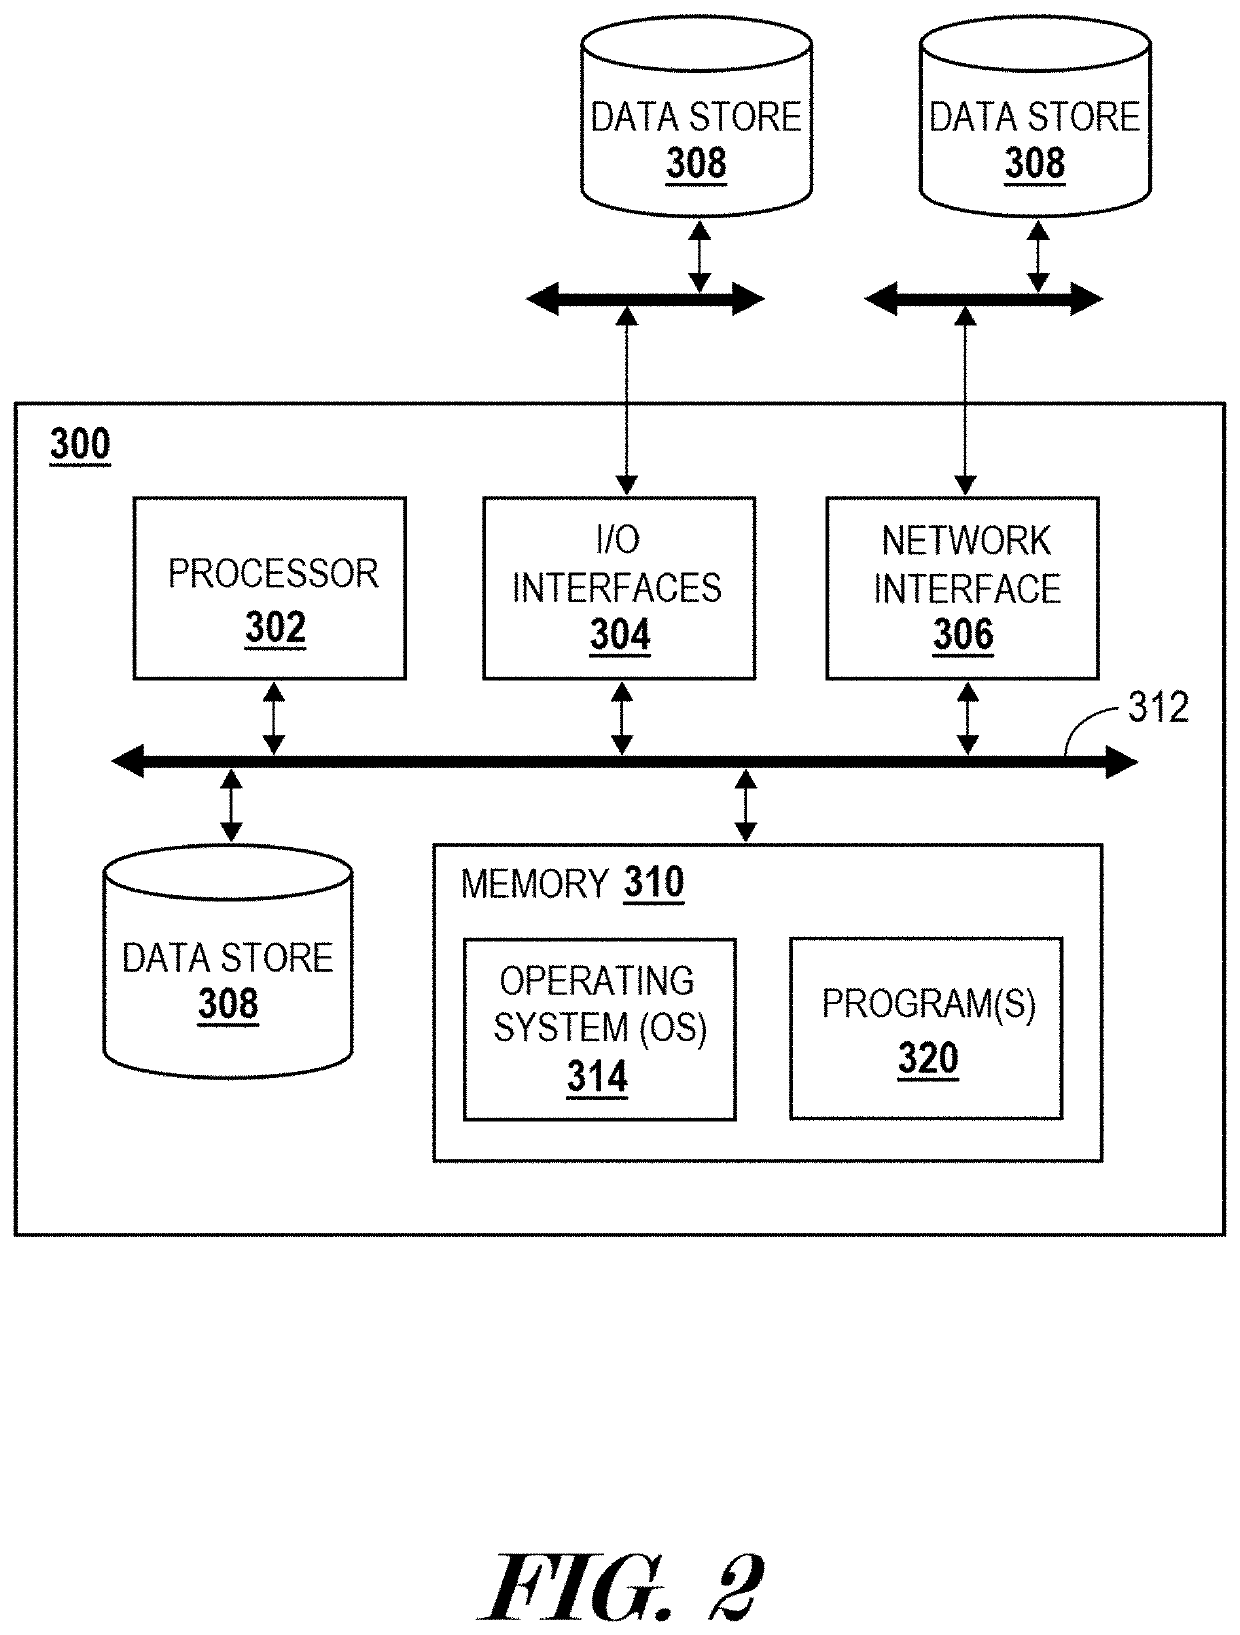 Computer-implemented methods and system for preventing unauthorized file modification by malicious software and the like